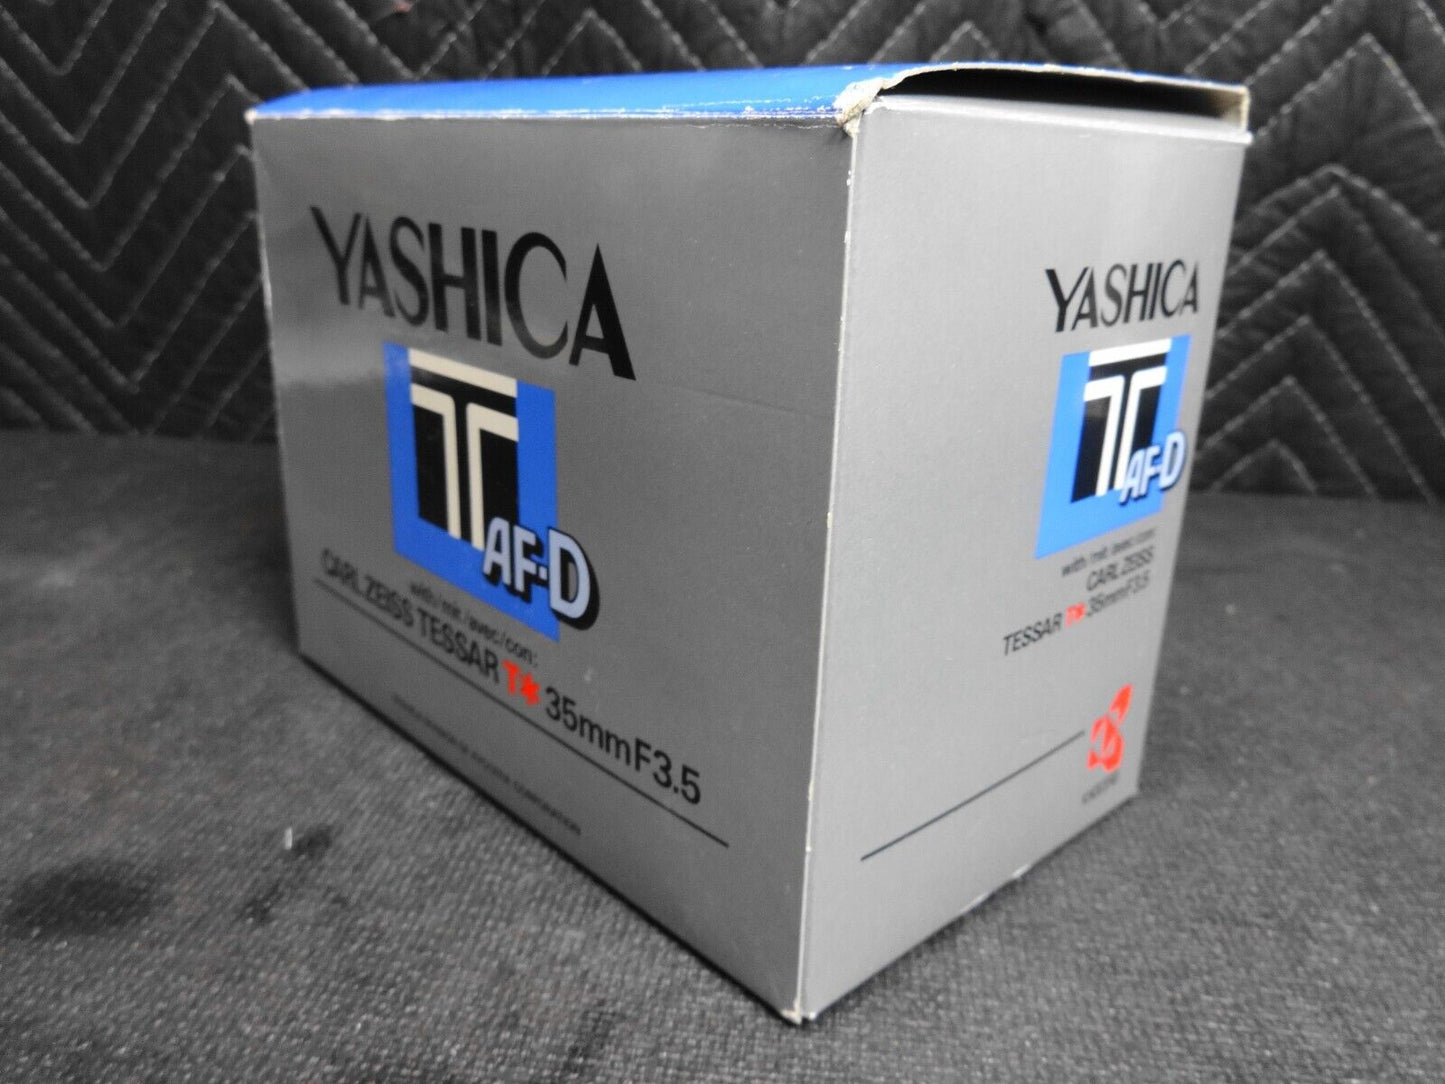 1984 Kyocera Yashica T AF-D 35mm Point & Shoot Film Camera w/ Box Manual Papers